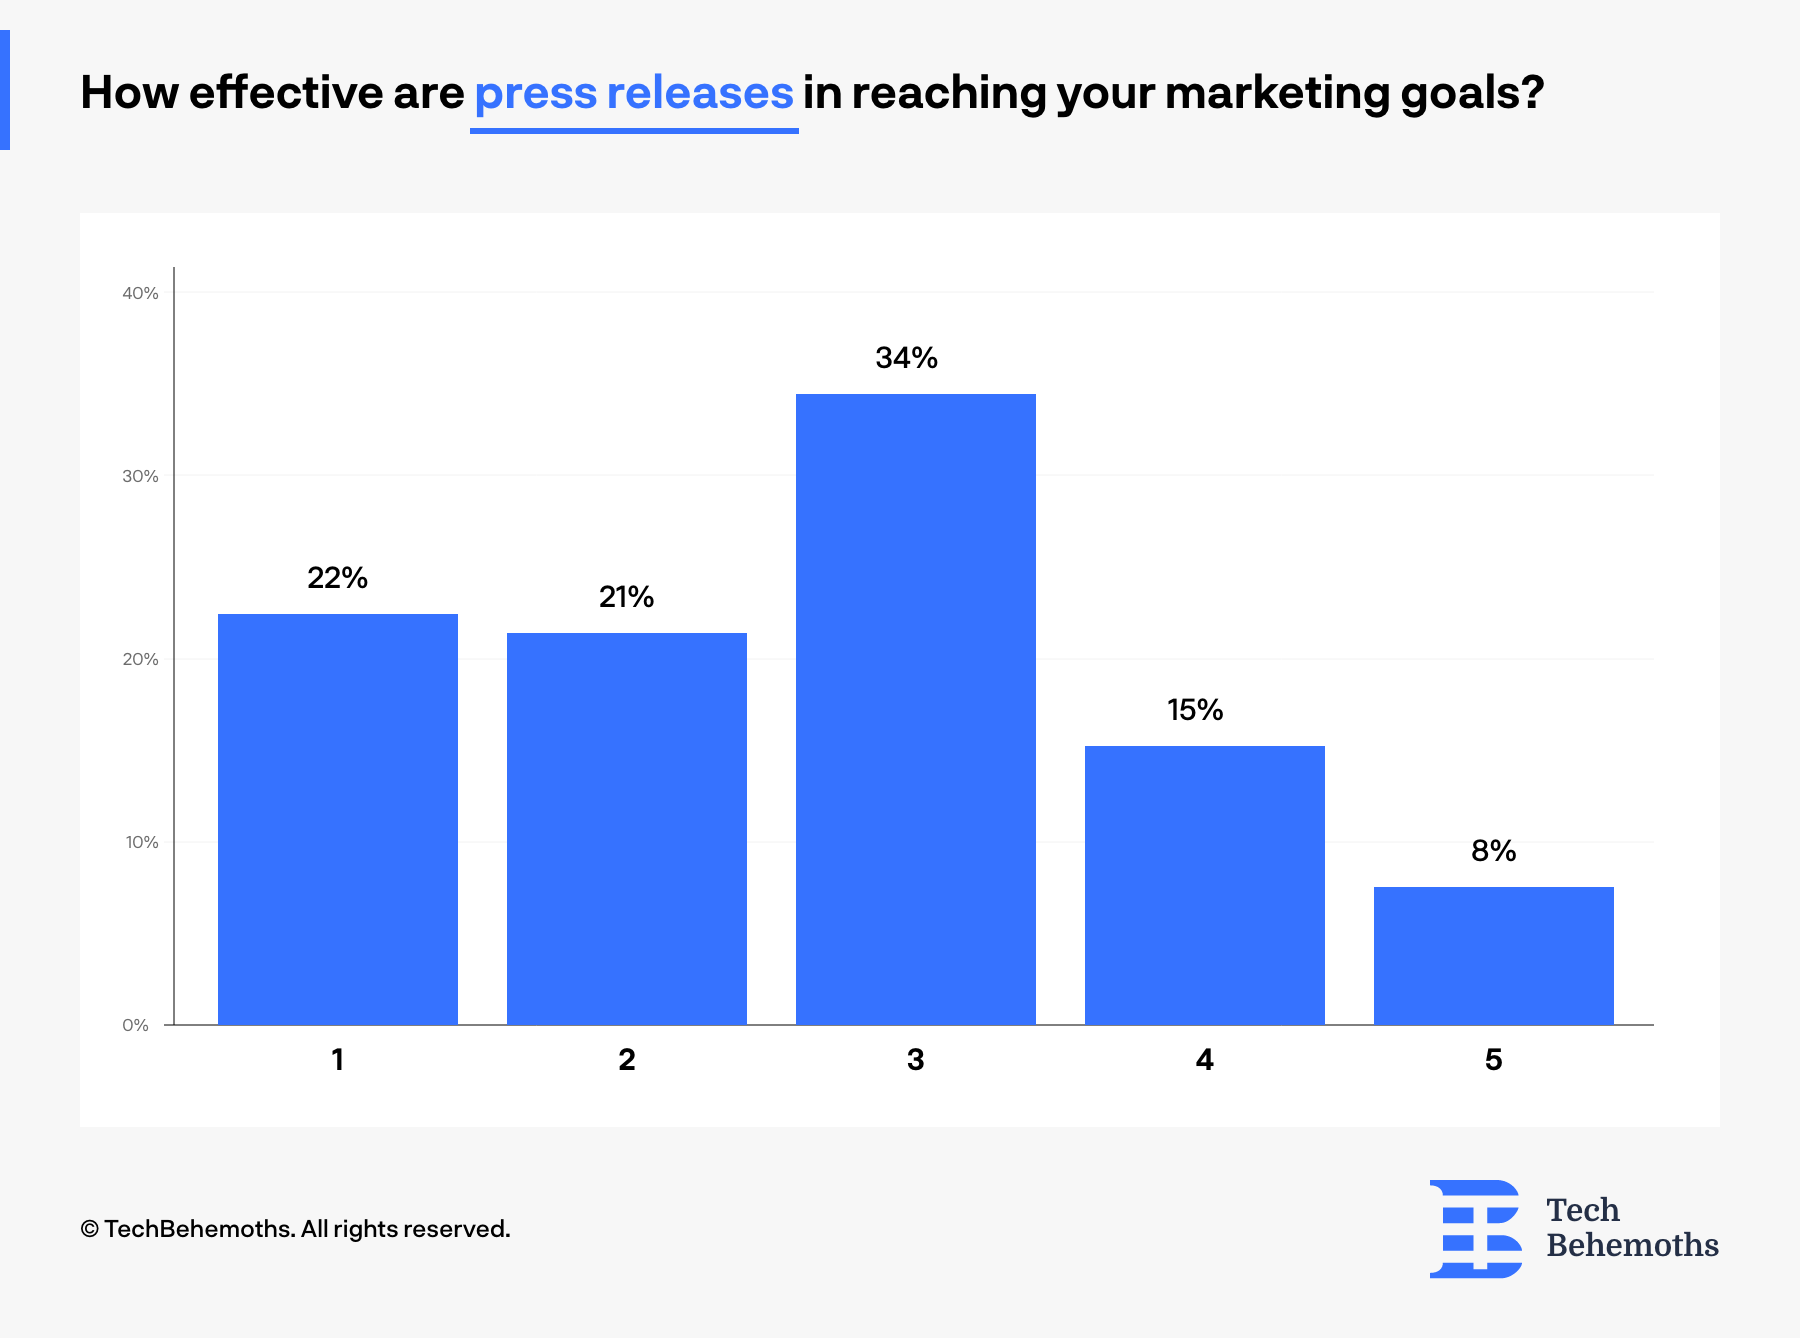 Only 8% of IT companies and digtial agencies consider that press releases are very effective 